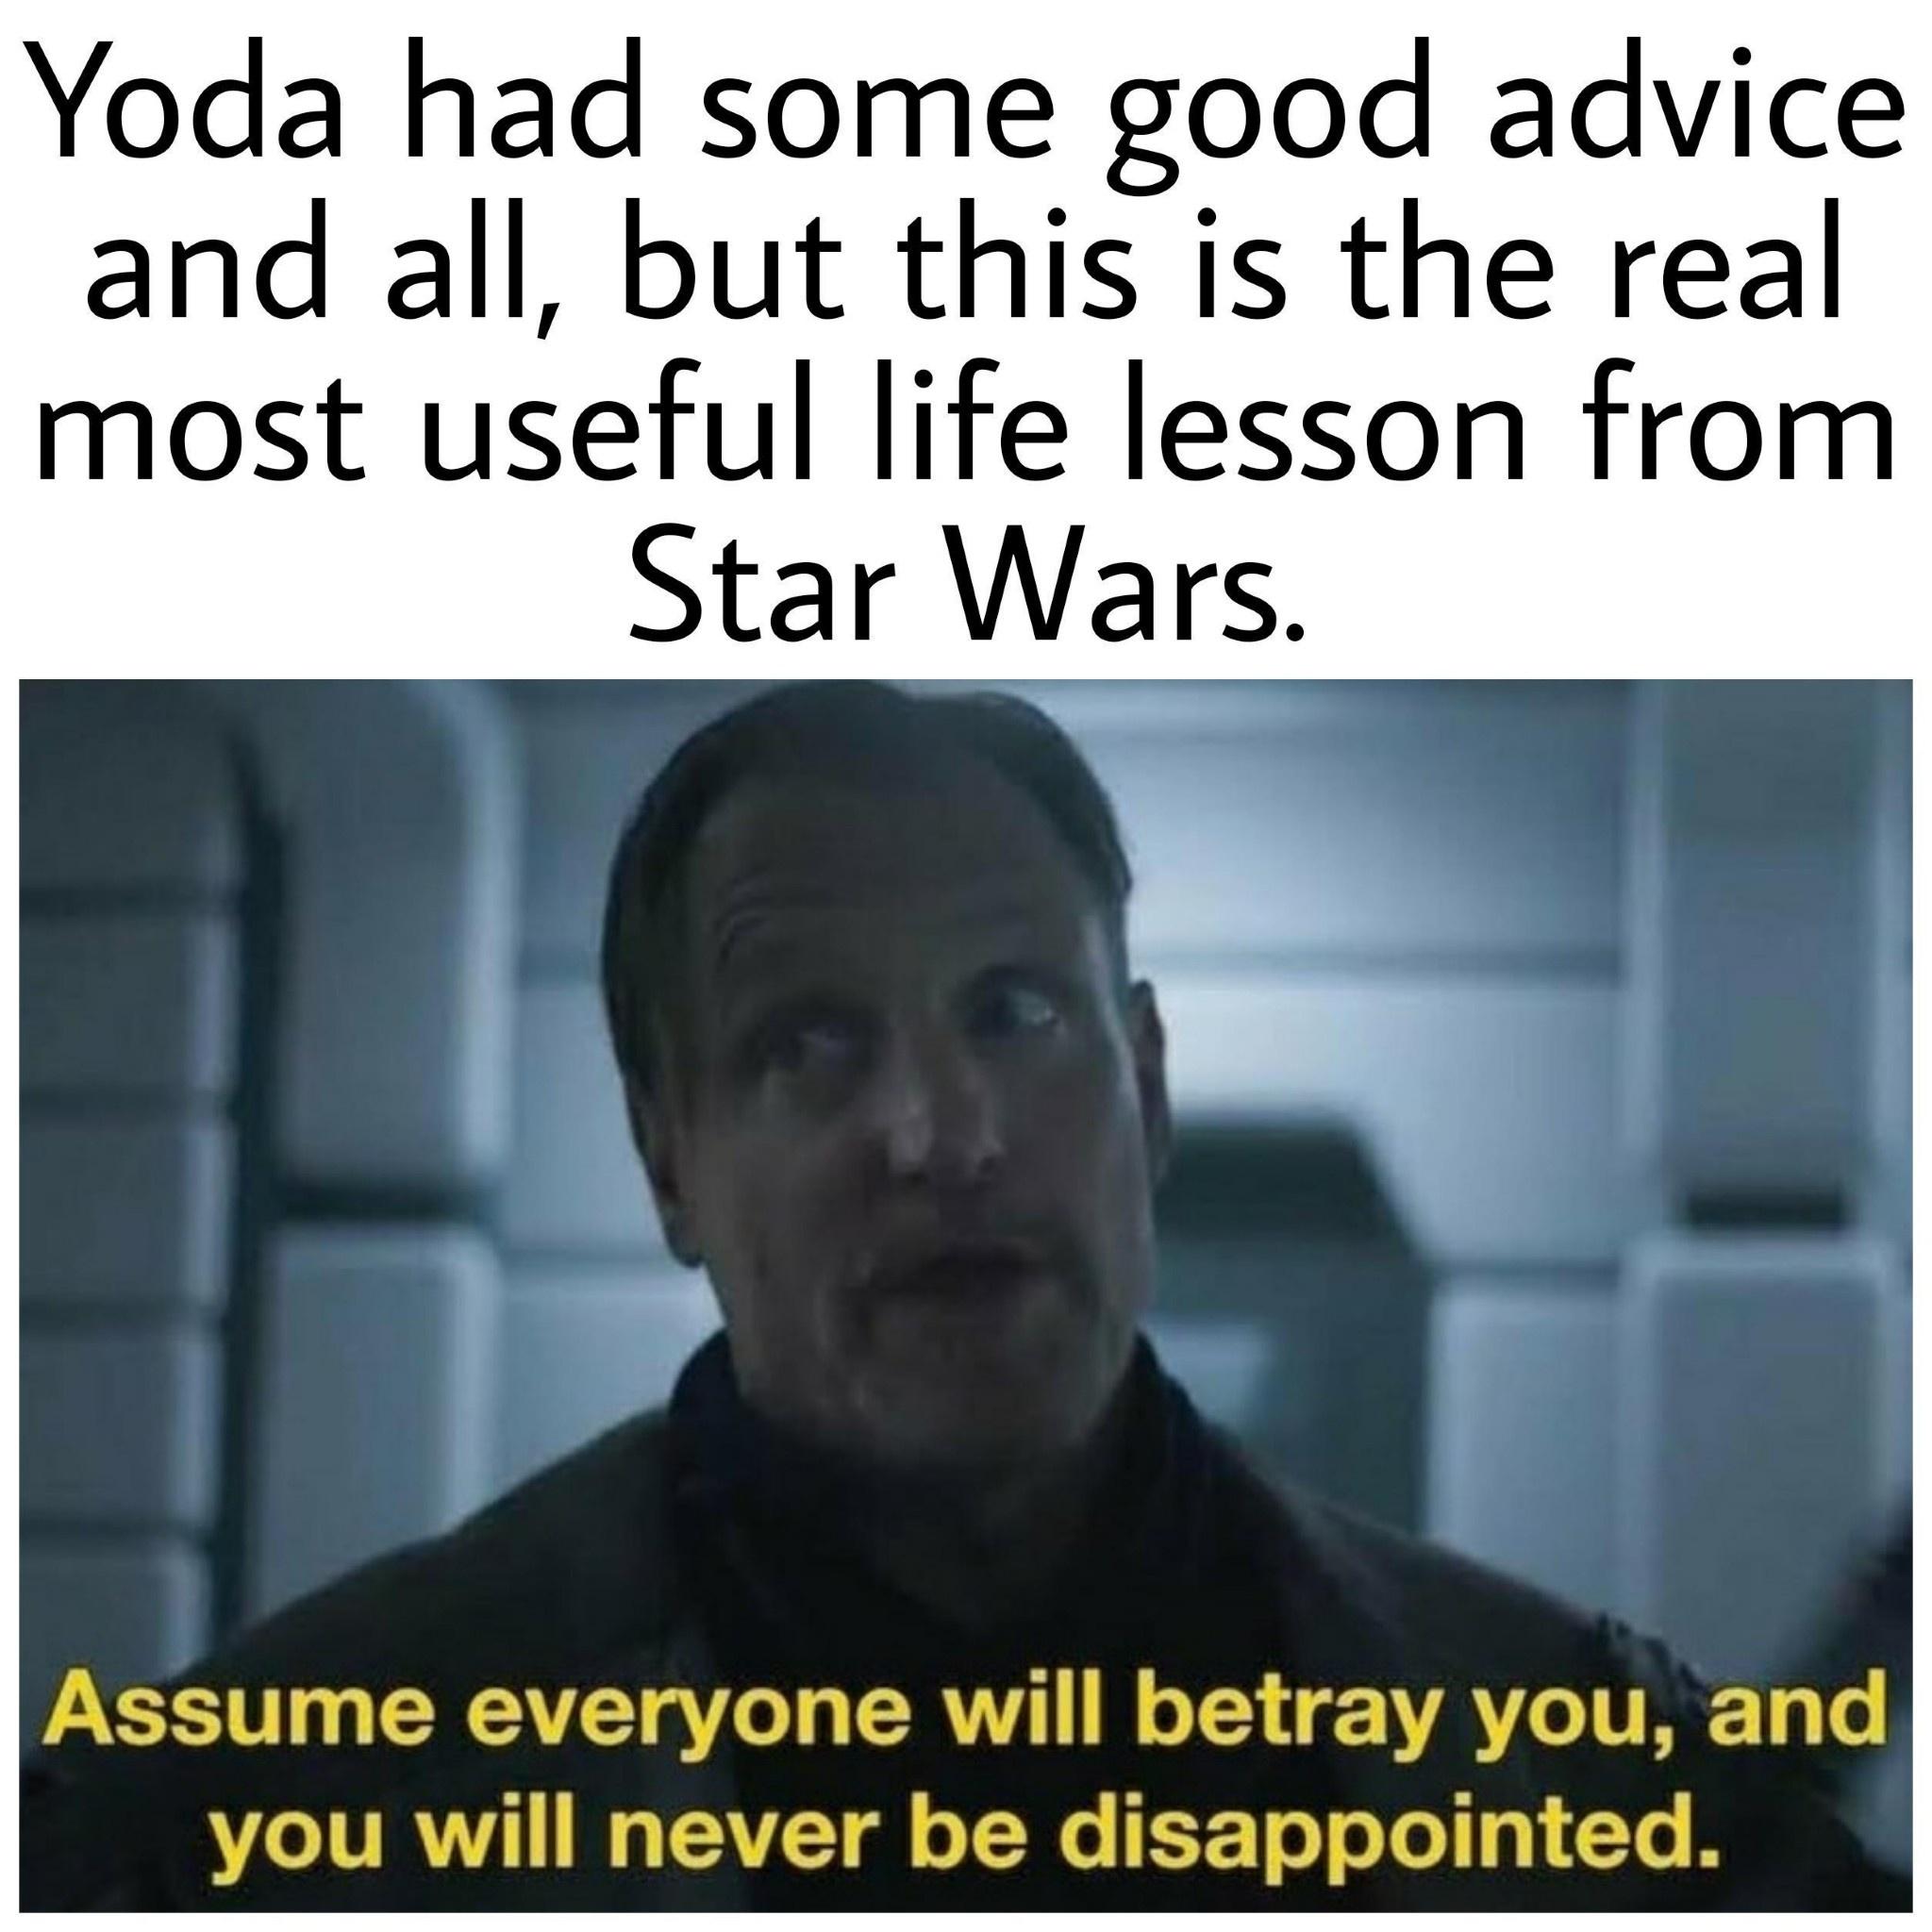 photo caption - Yoda had some good advice and all, but this is the real most useful life lesson from Star Wars. Assume everyone will betray you, and you will never be disappointed.